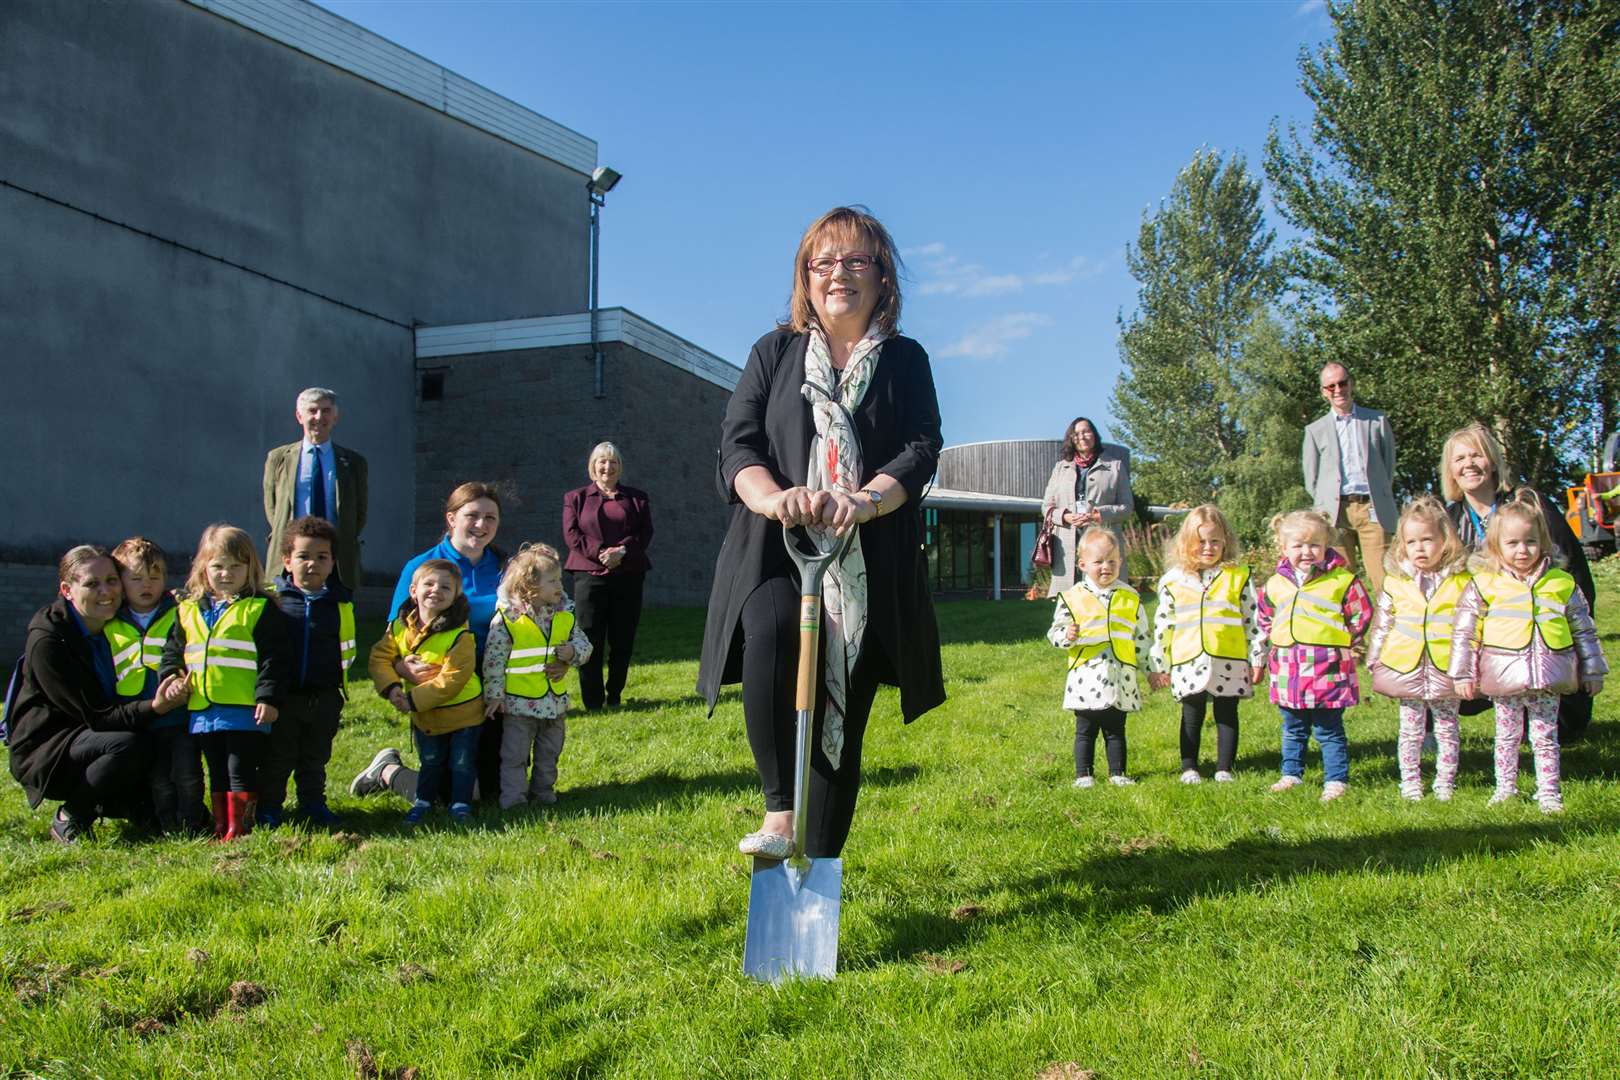 Cllr Sonya Warren, Chair of the Children and Young Peopleâs Services Committee (front) cuts the first turf for the new nursery building in Keith. ..Joining her are (from back left) Cllr Donald Gatt, Cllr Teresa Coull, Cllr Laura Powell and Project manager for ELC expansion Robin Paterson and Eleanor Smith (kneeling right) Nursery Manager for Flexible Childcare Services...Picture: Becky Saunderson..